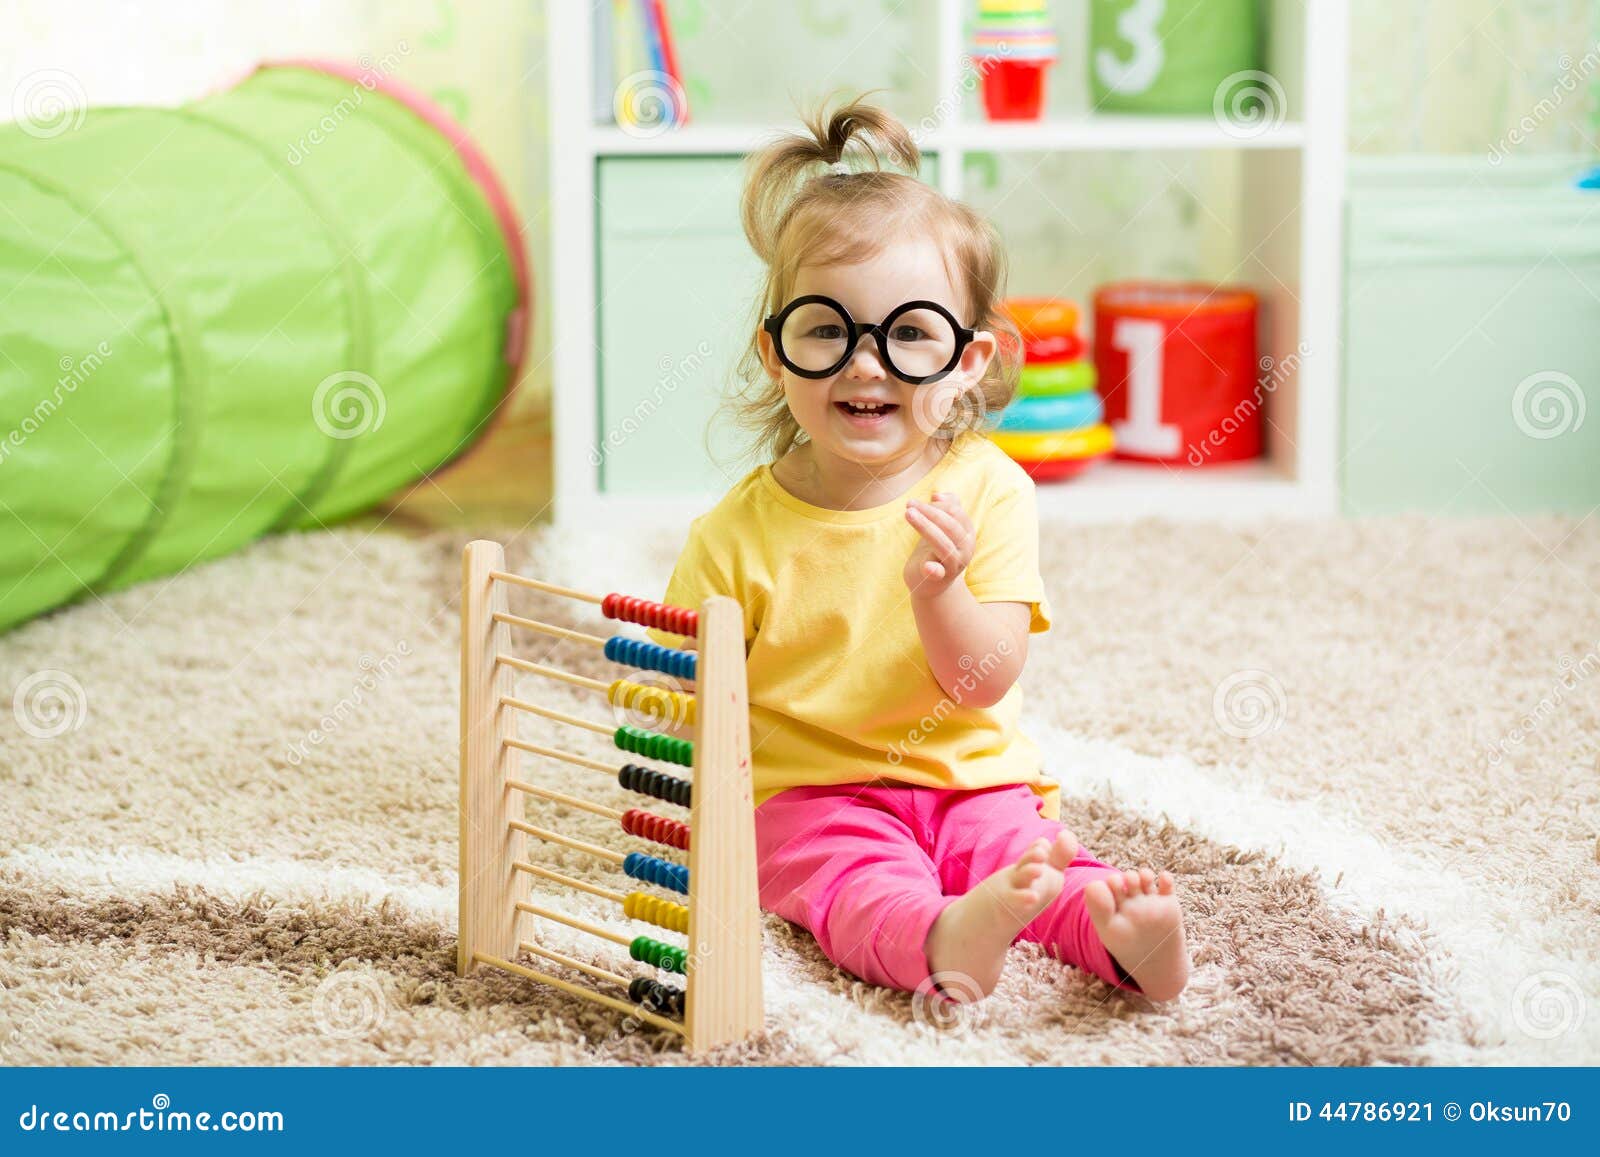 kid weared eyeglasses playing with abacus